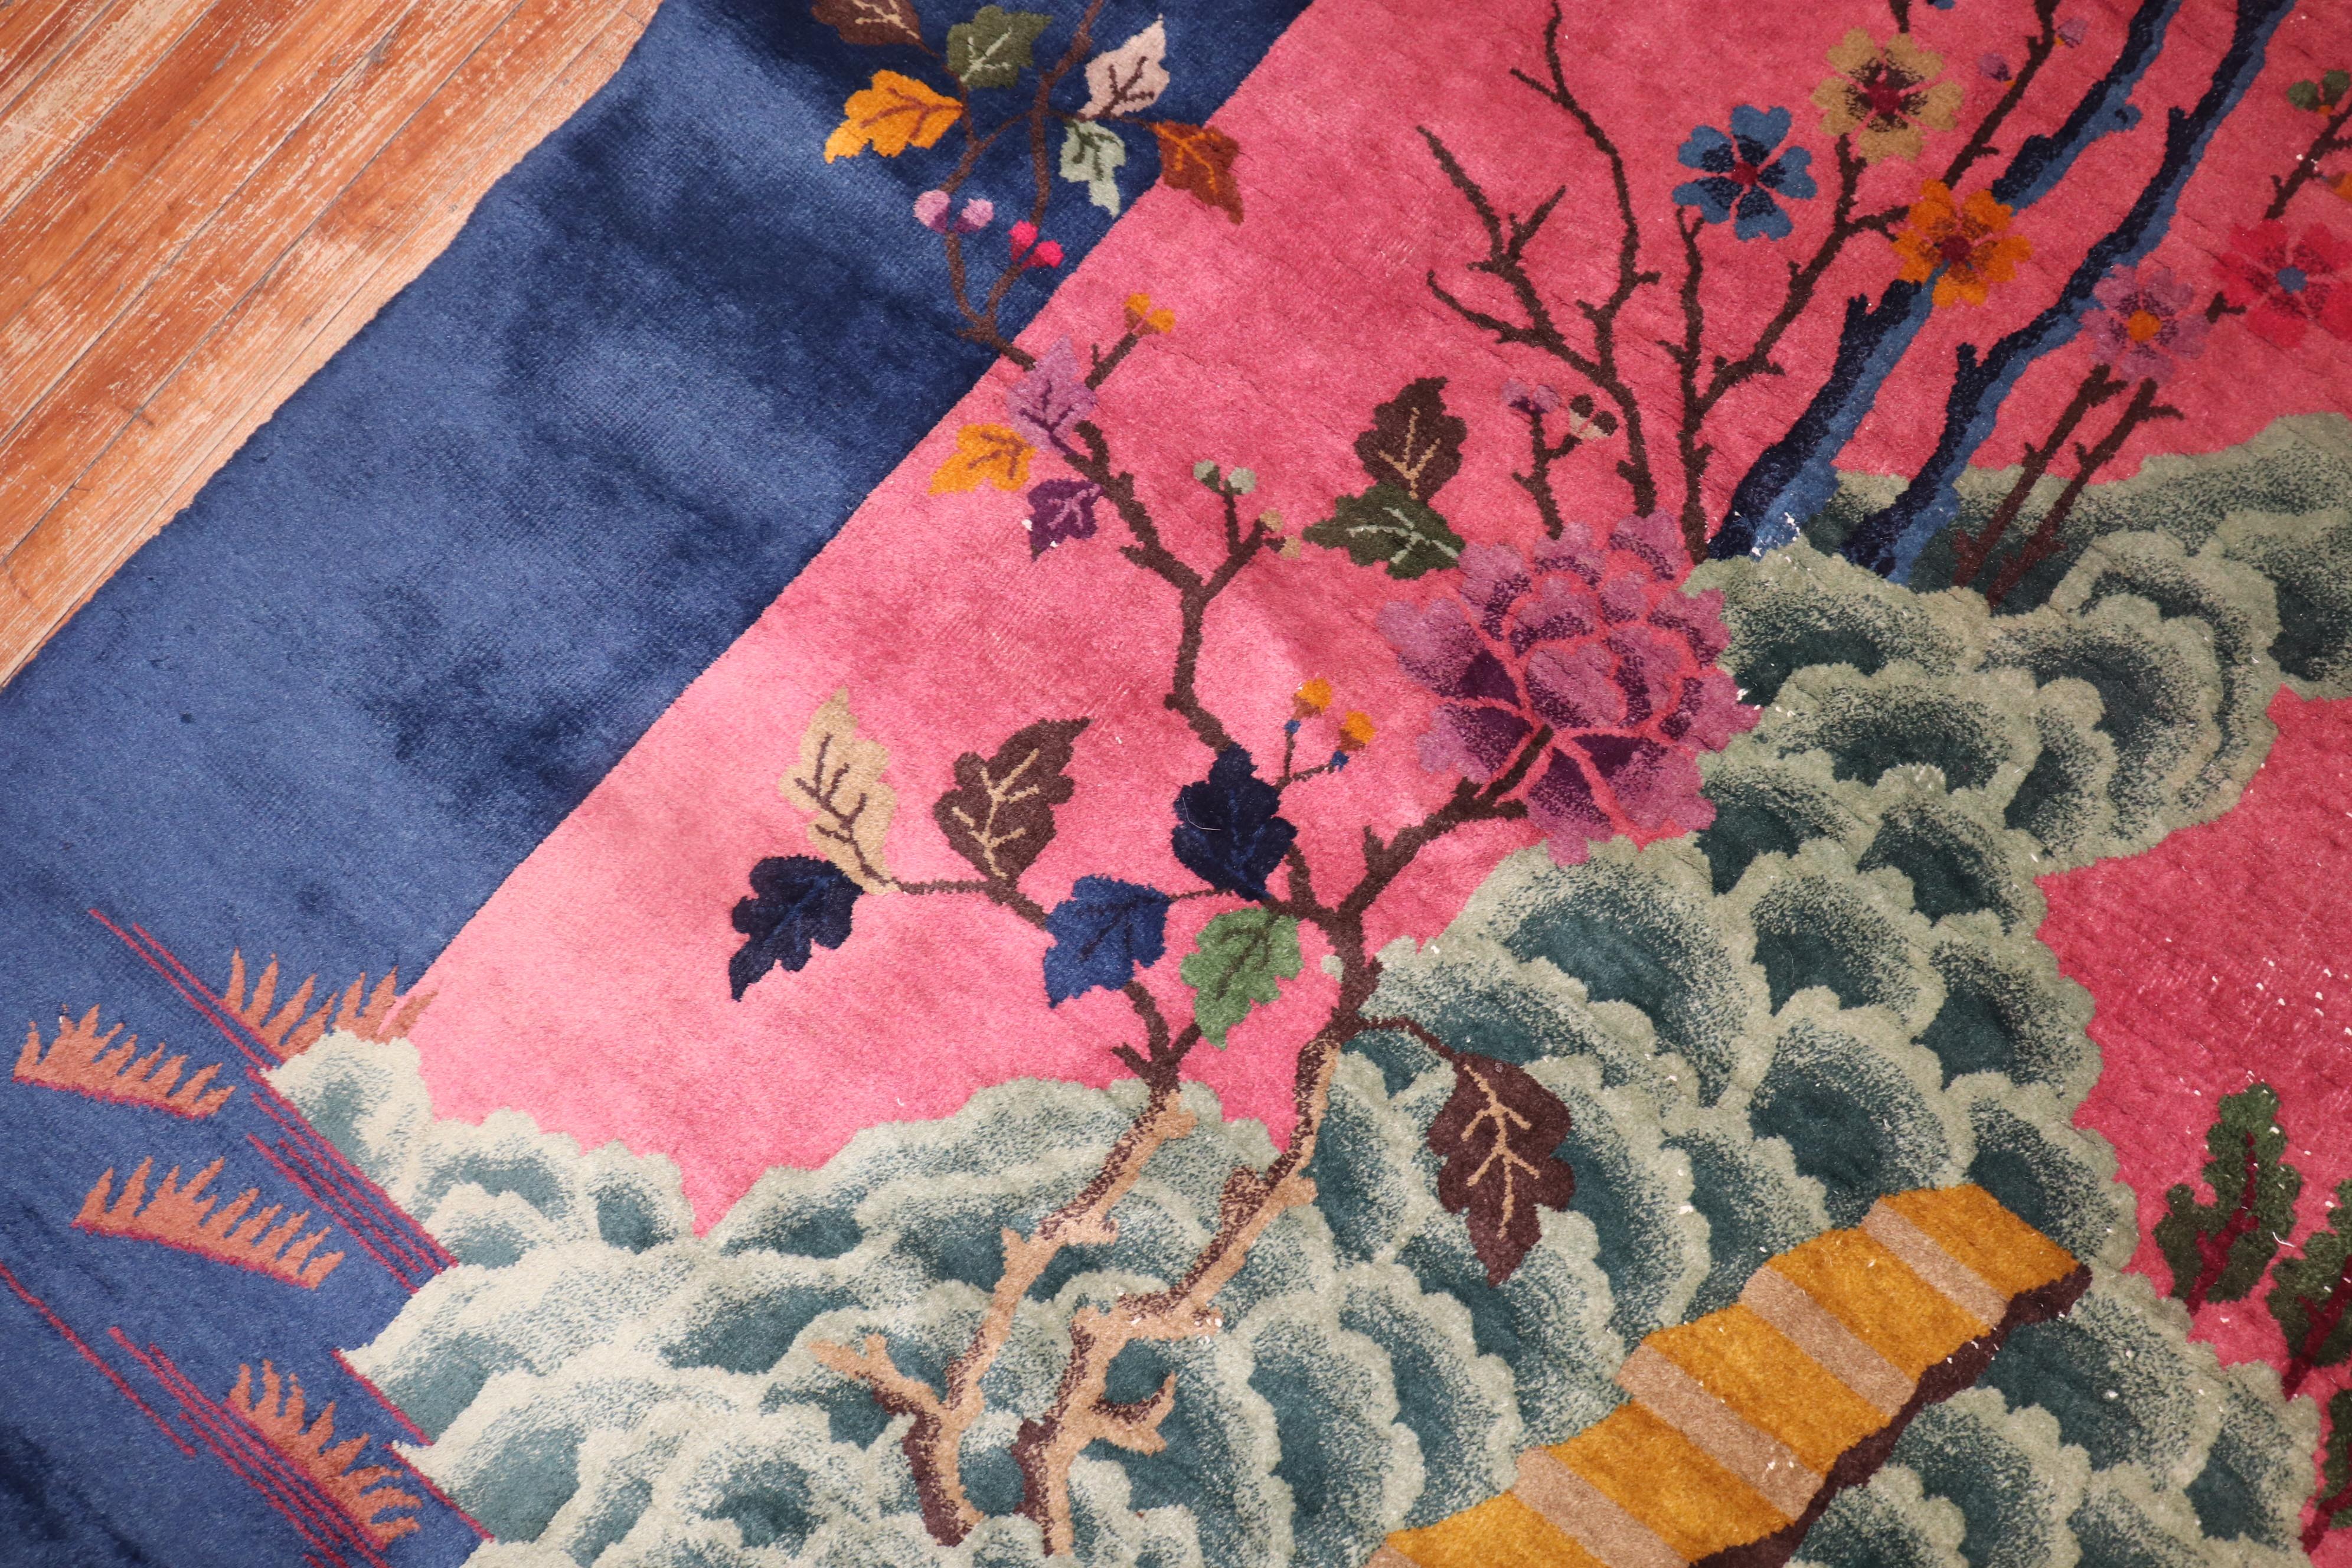 Zabihi Collection Bright Pink Chinese Art Deco Large Room Size Rug im Zustand „Gut“ im Angebot in New York, NY